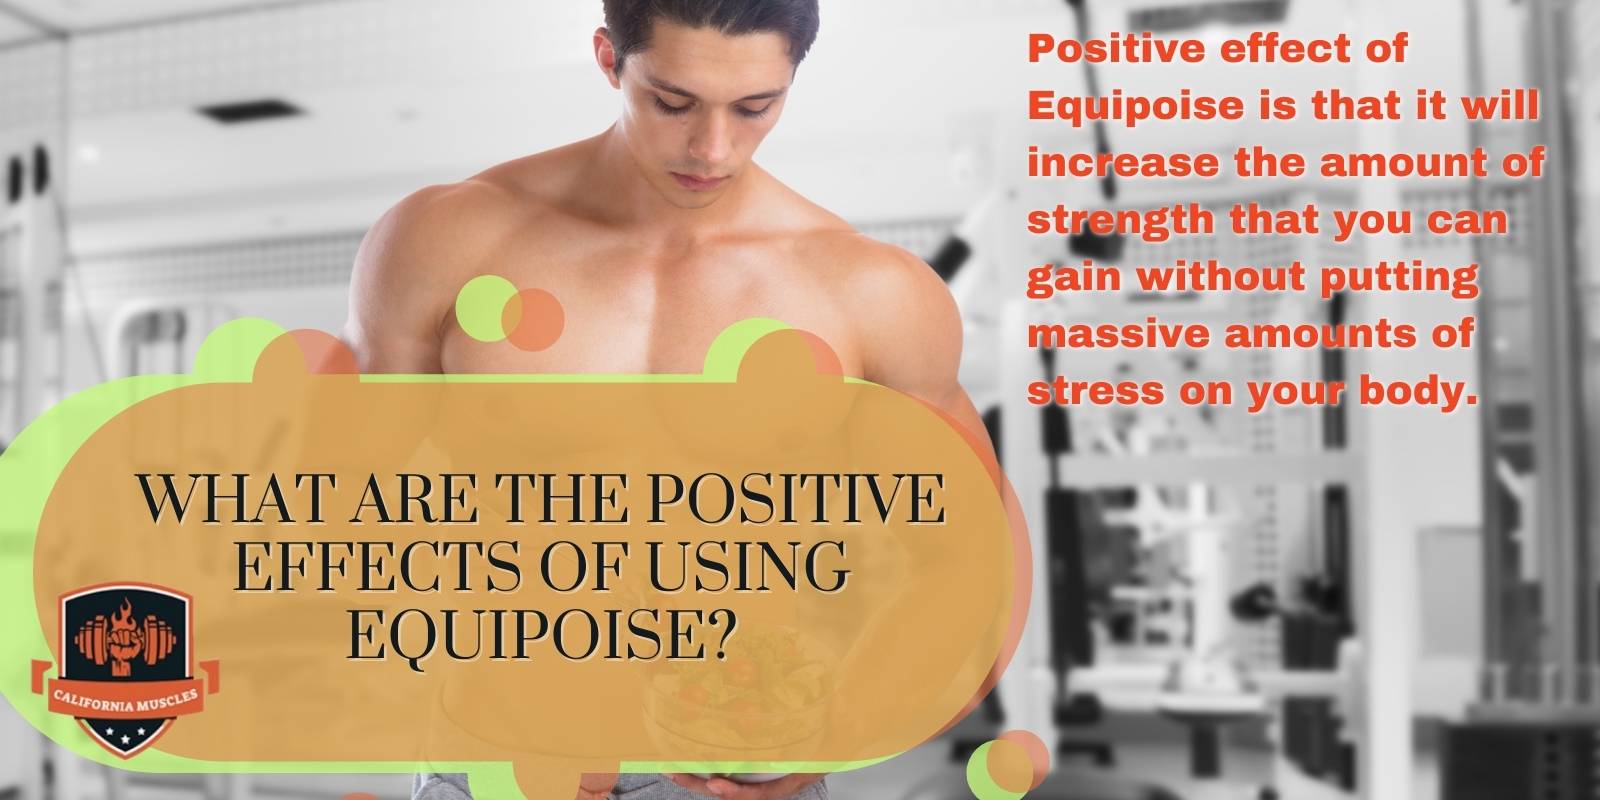 What are the positive effects of using Equipoise?